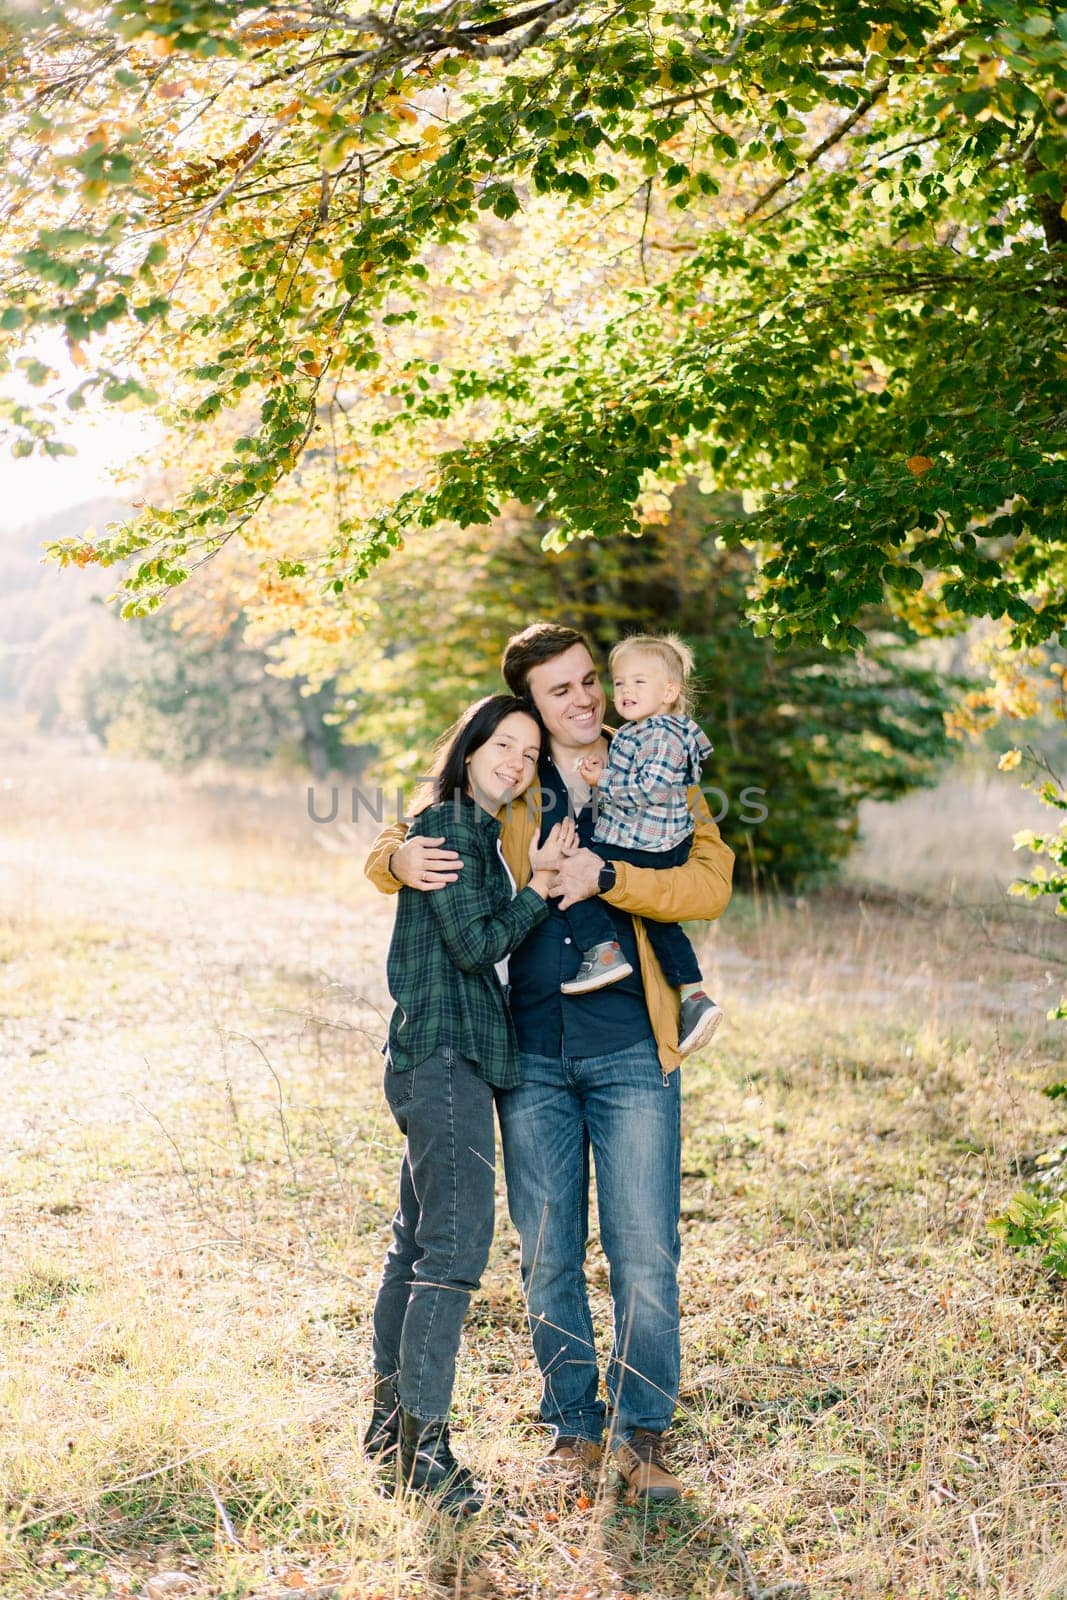 Mom hugs dad with a little girl in his arms while standing in the autumn forest. High quality photo